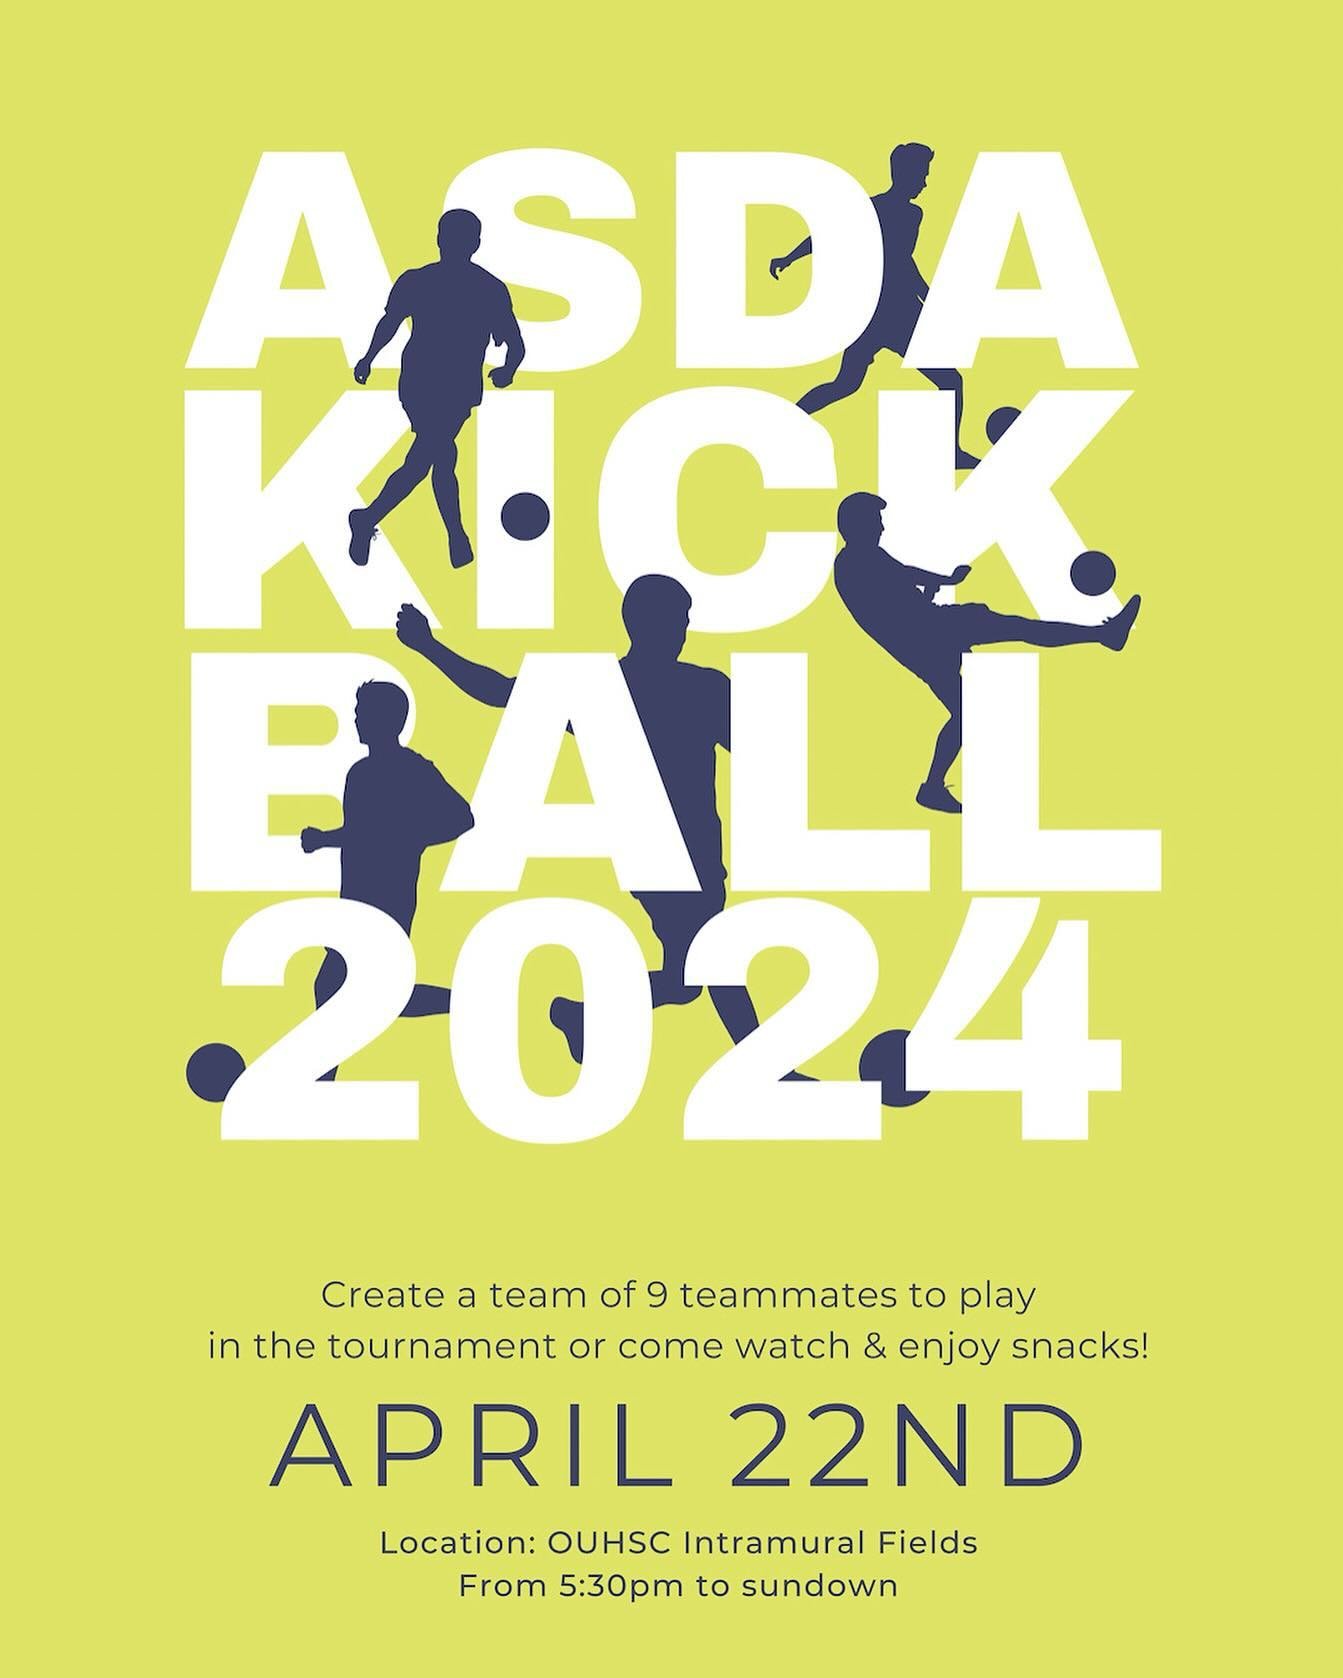 ASDA and Student Council are teaming up to host a kickball tournament on April 22nd! Each team will consist of 9 players at NO COST. Even if you are not playing, come and enjoy watching your classmates play kickball!! :) 
LINK TO SIGN UP IS IN OUR BI